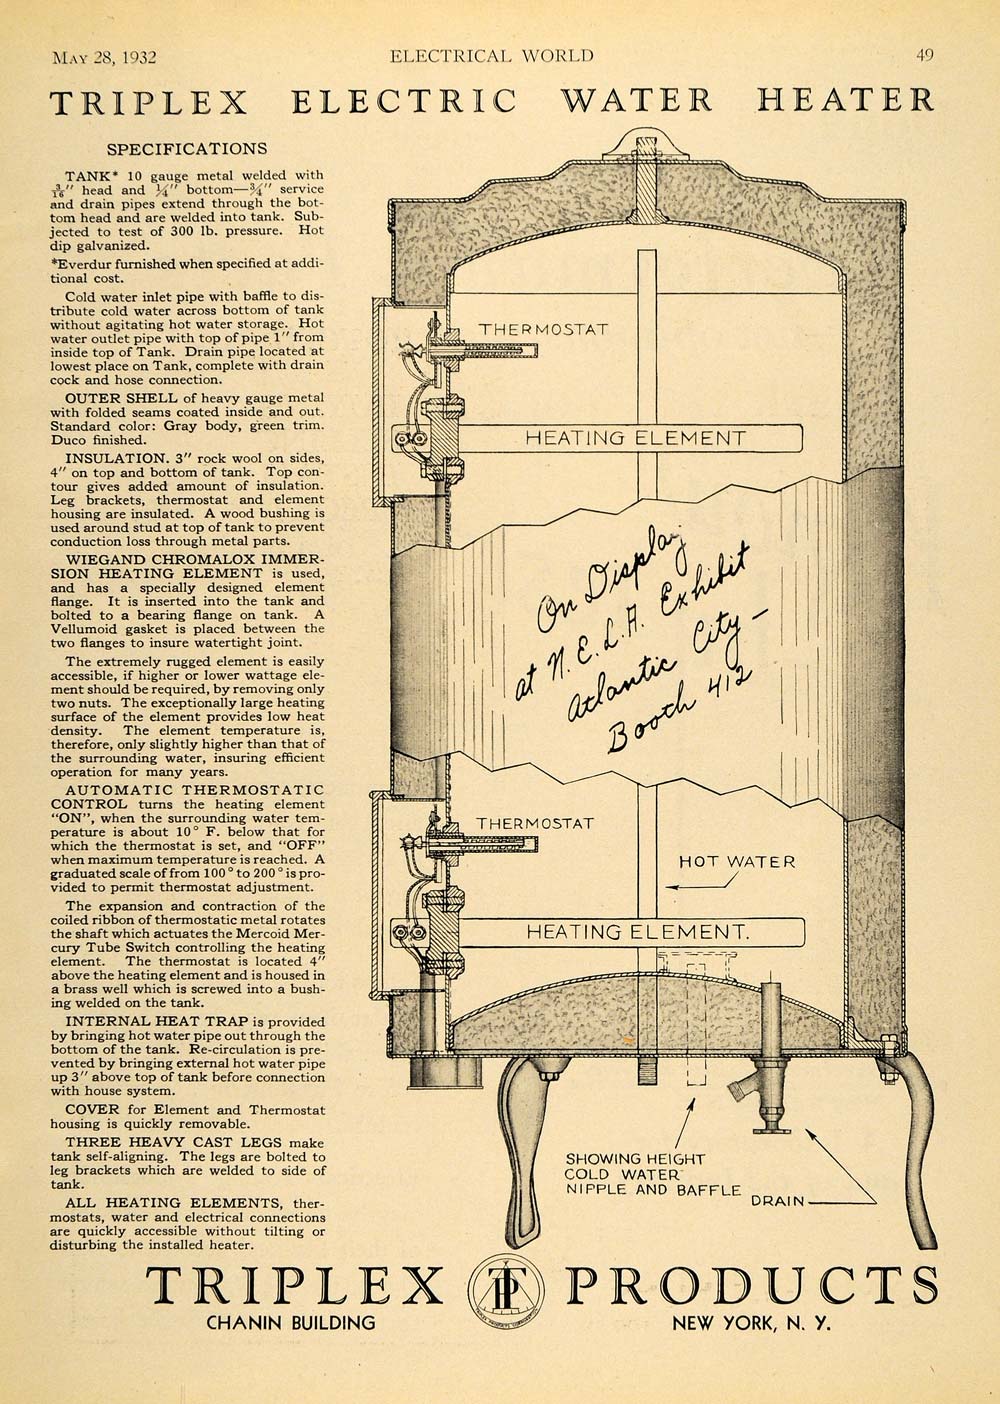 1932 Ad Triplex Products Electric Water Heater NY - ORIGINAL ADVERTISING ELC1